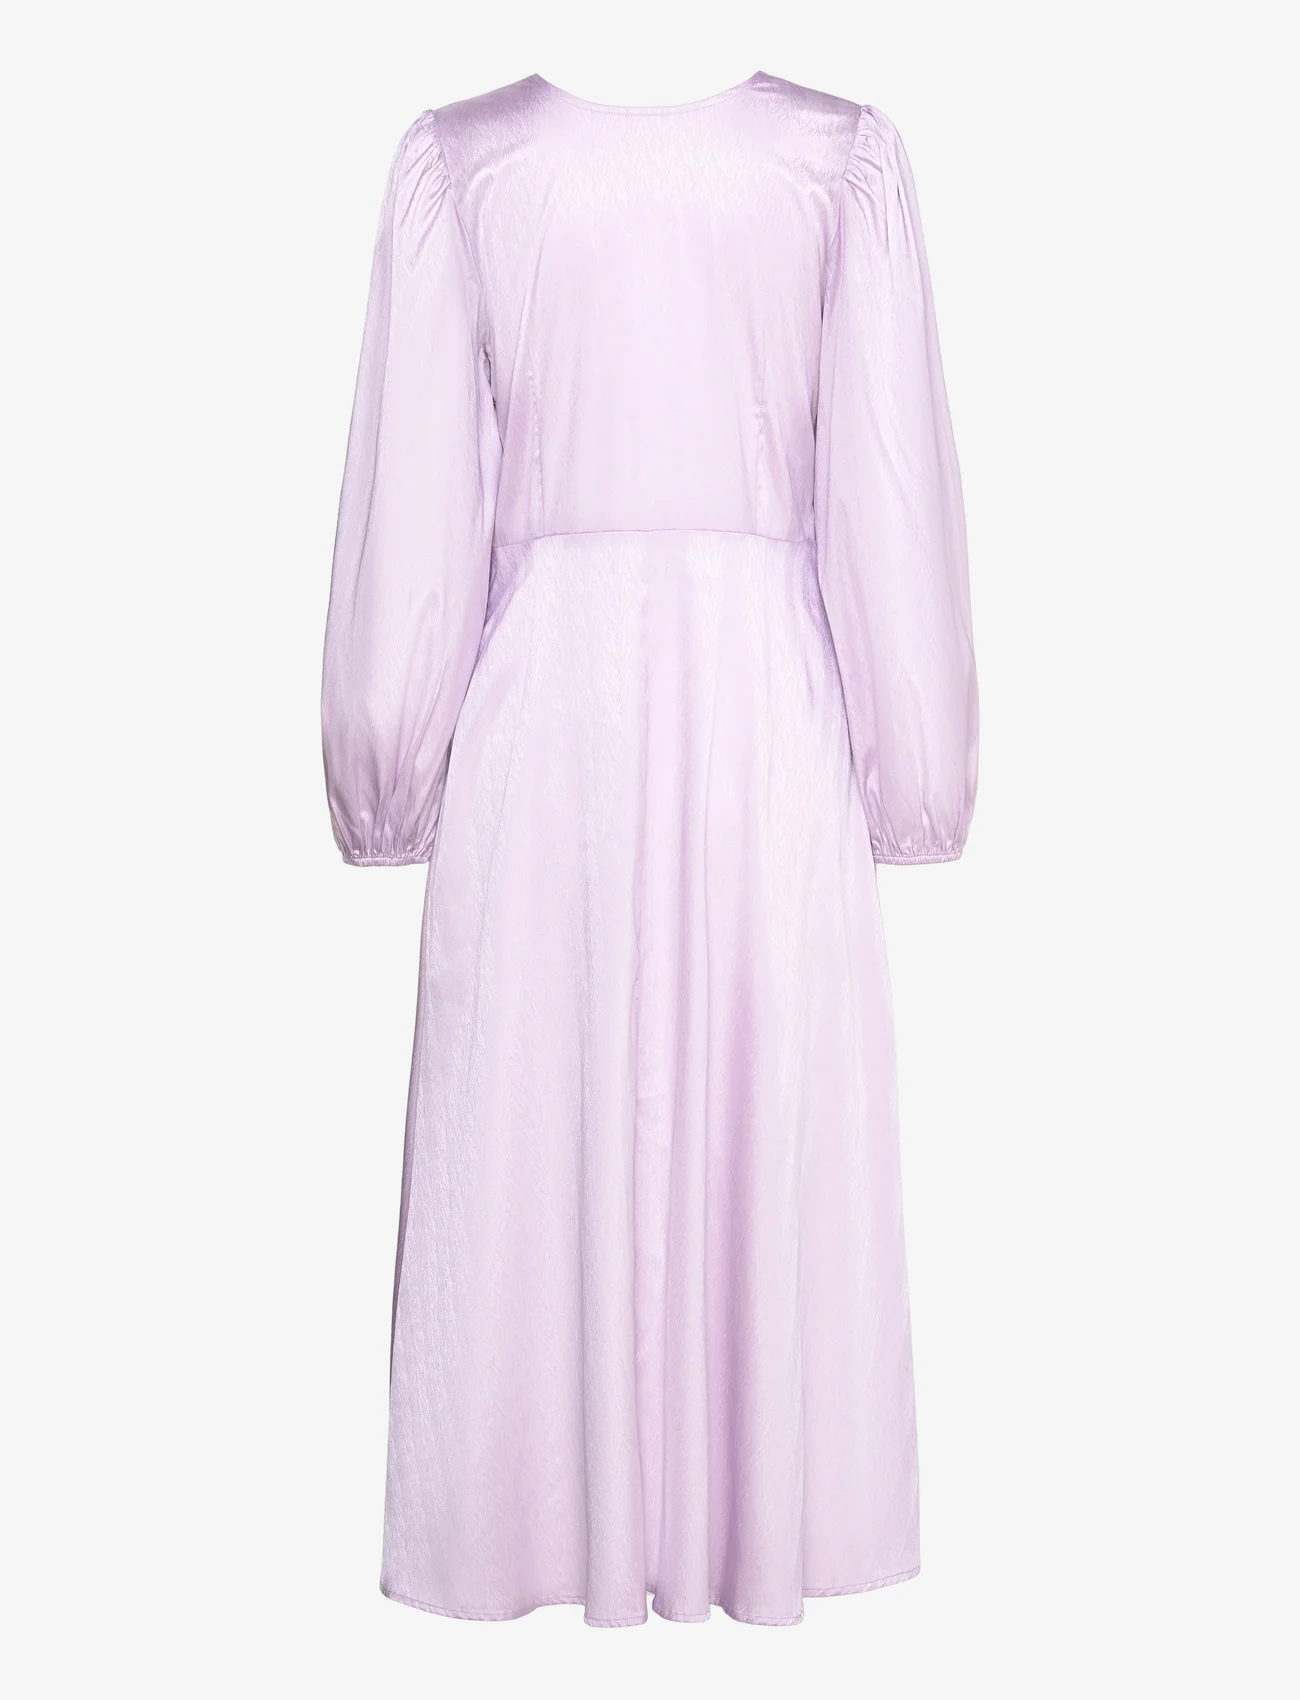 A-View - Enitta dress - party wear at outlet prices - lilac - 1